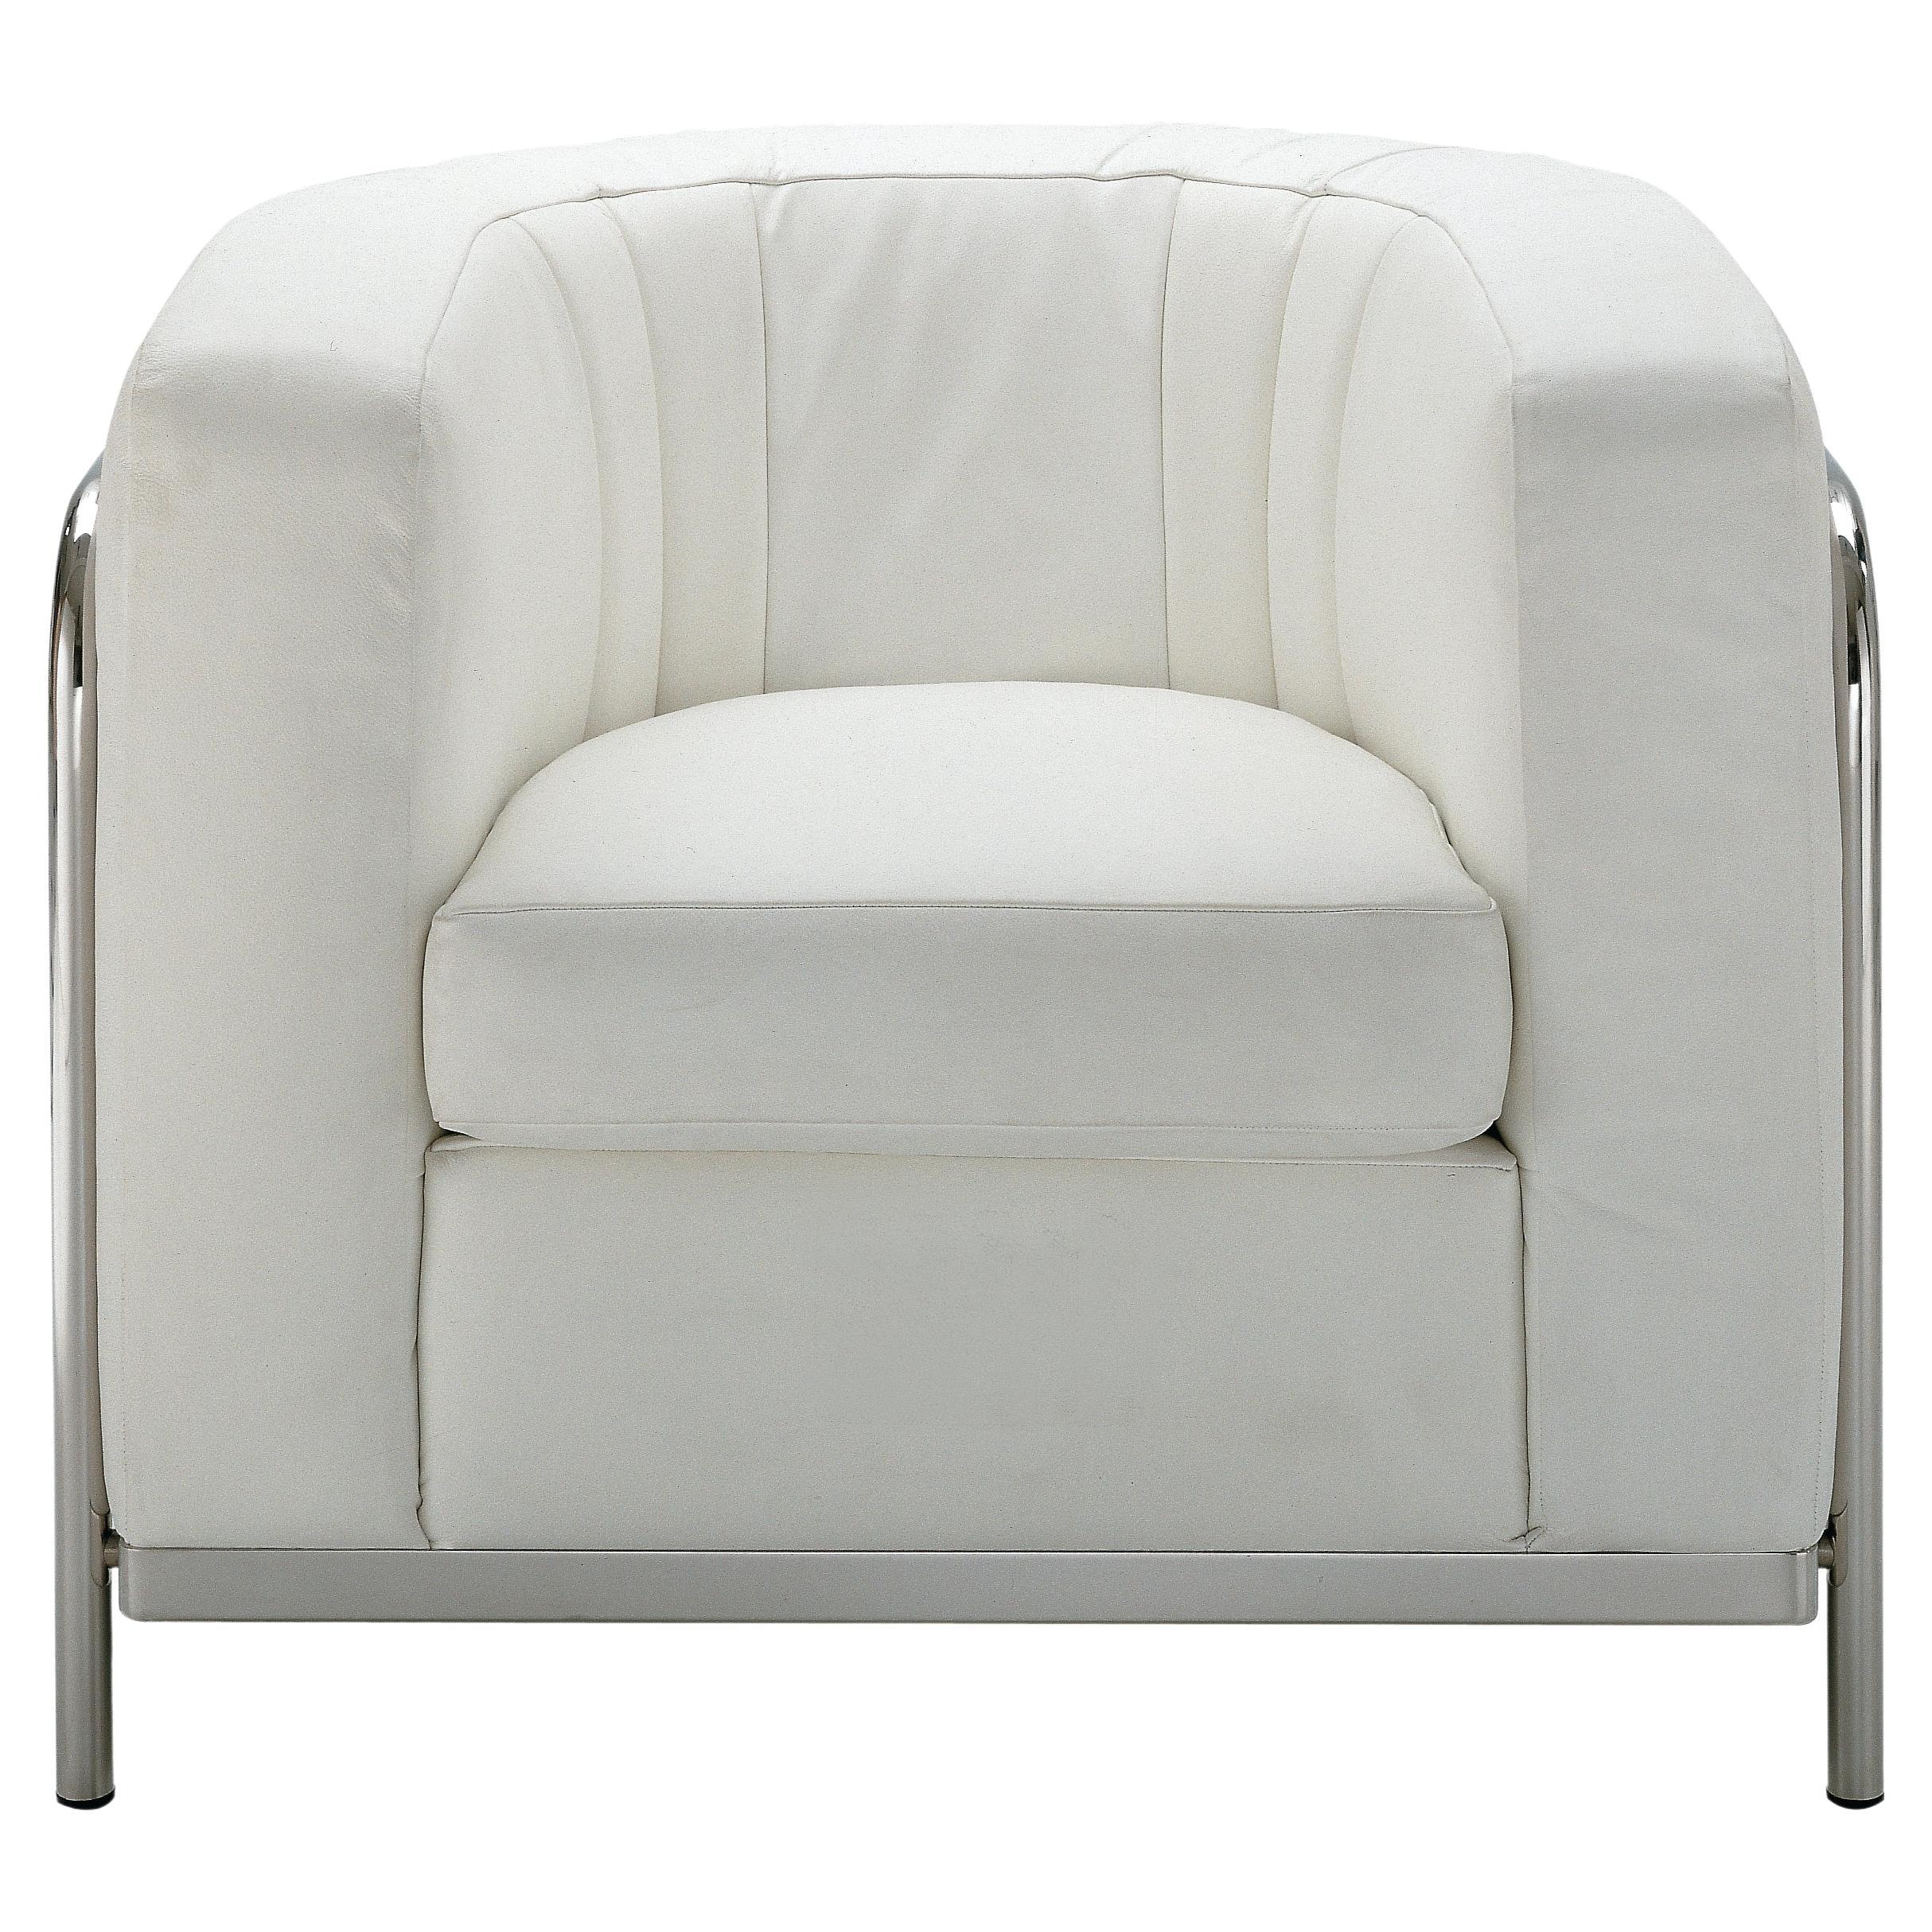 Zanotta Onda Armchair in White Leather with Stainless Steel Tubular Frame